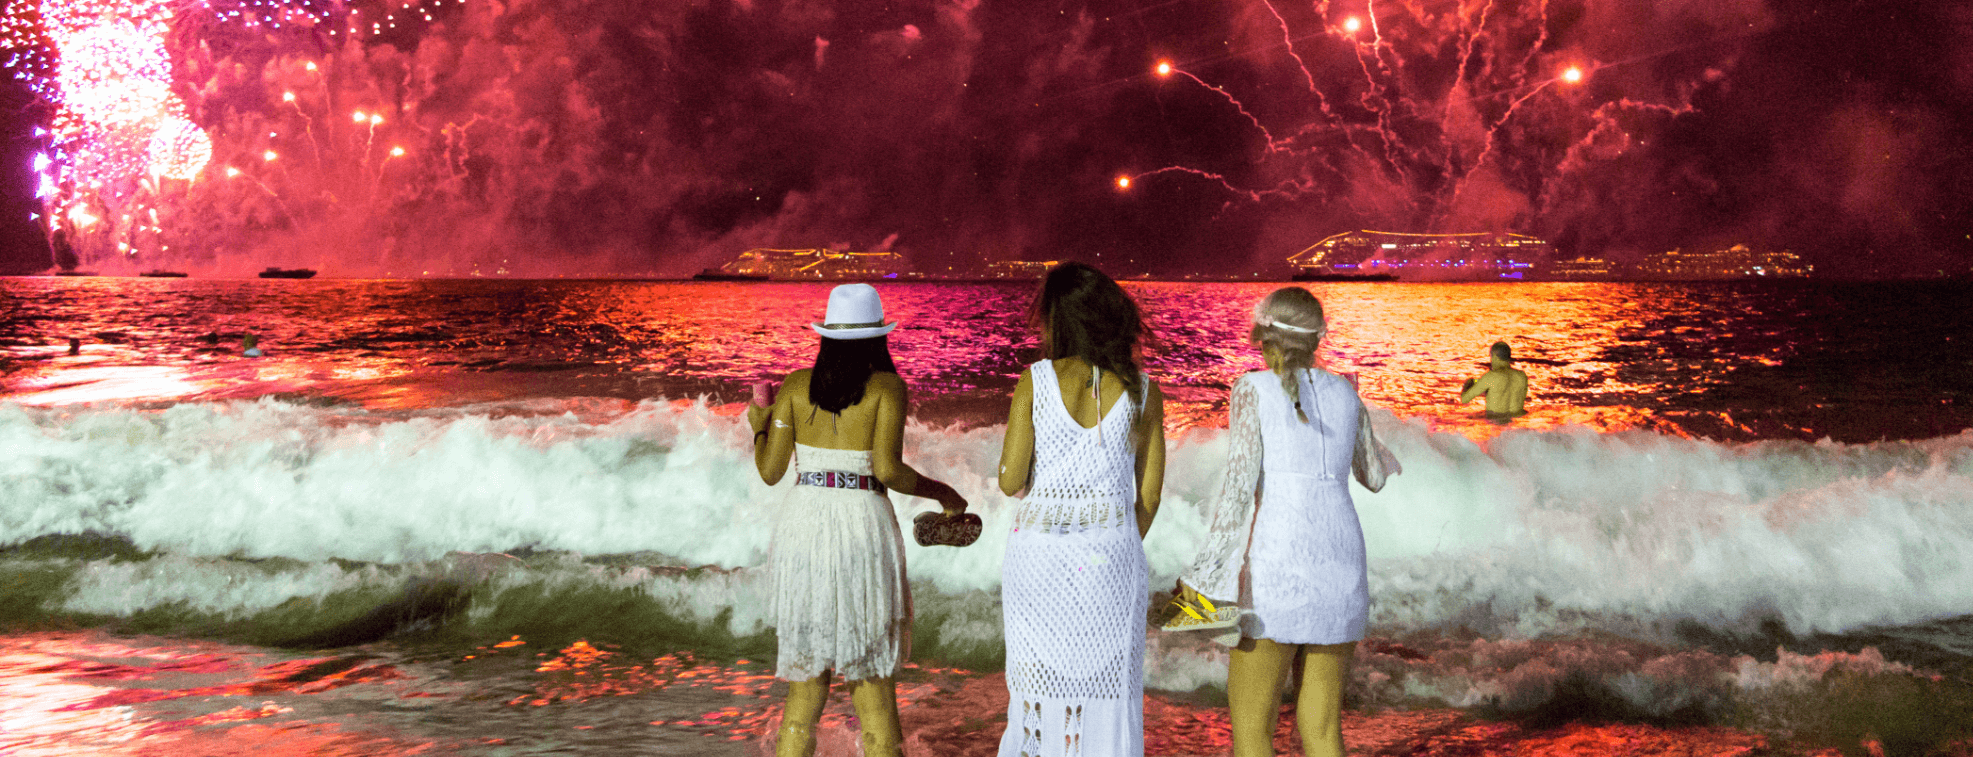 One of Brazilian New Year's Eve Traditions is to wear white and jump over waves